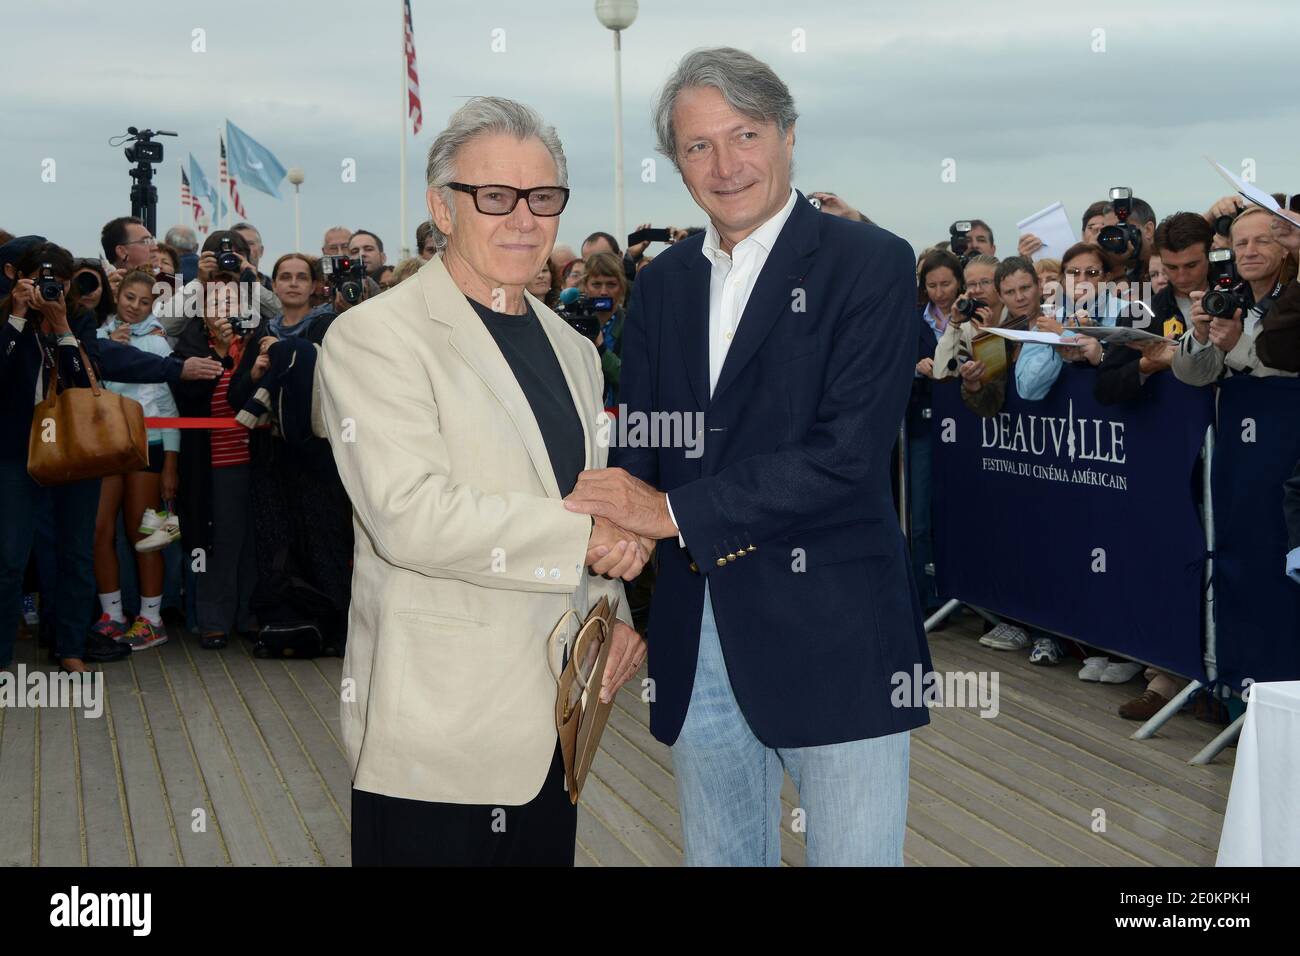 Harvey Keitel, seen here with Deauville's mayor Philippe Augier, takes part in a tribute for his career in film as part of the 38th Deauville American Film Festival in Deauville, France on September 1, 2012. Photo by Nicolas Briquet/ABACAPRESS.COM Stock Photo